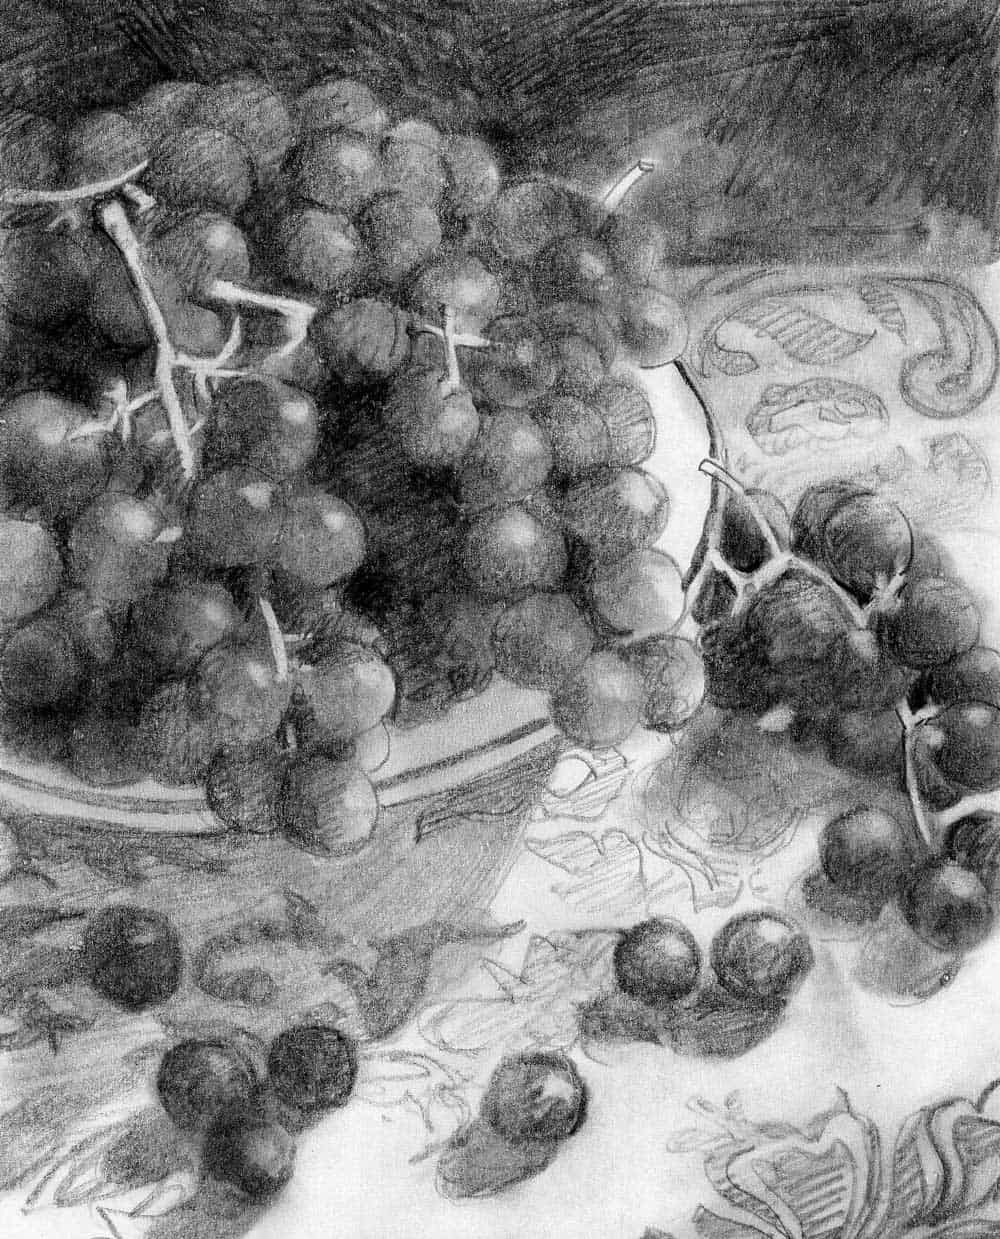 An image of grapes, assembled in the studio. Final cover art for a magazine cover. Brent Watkinson